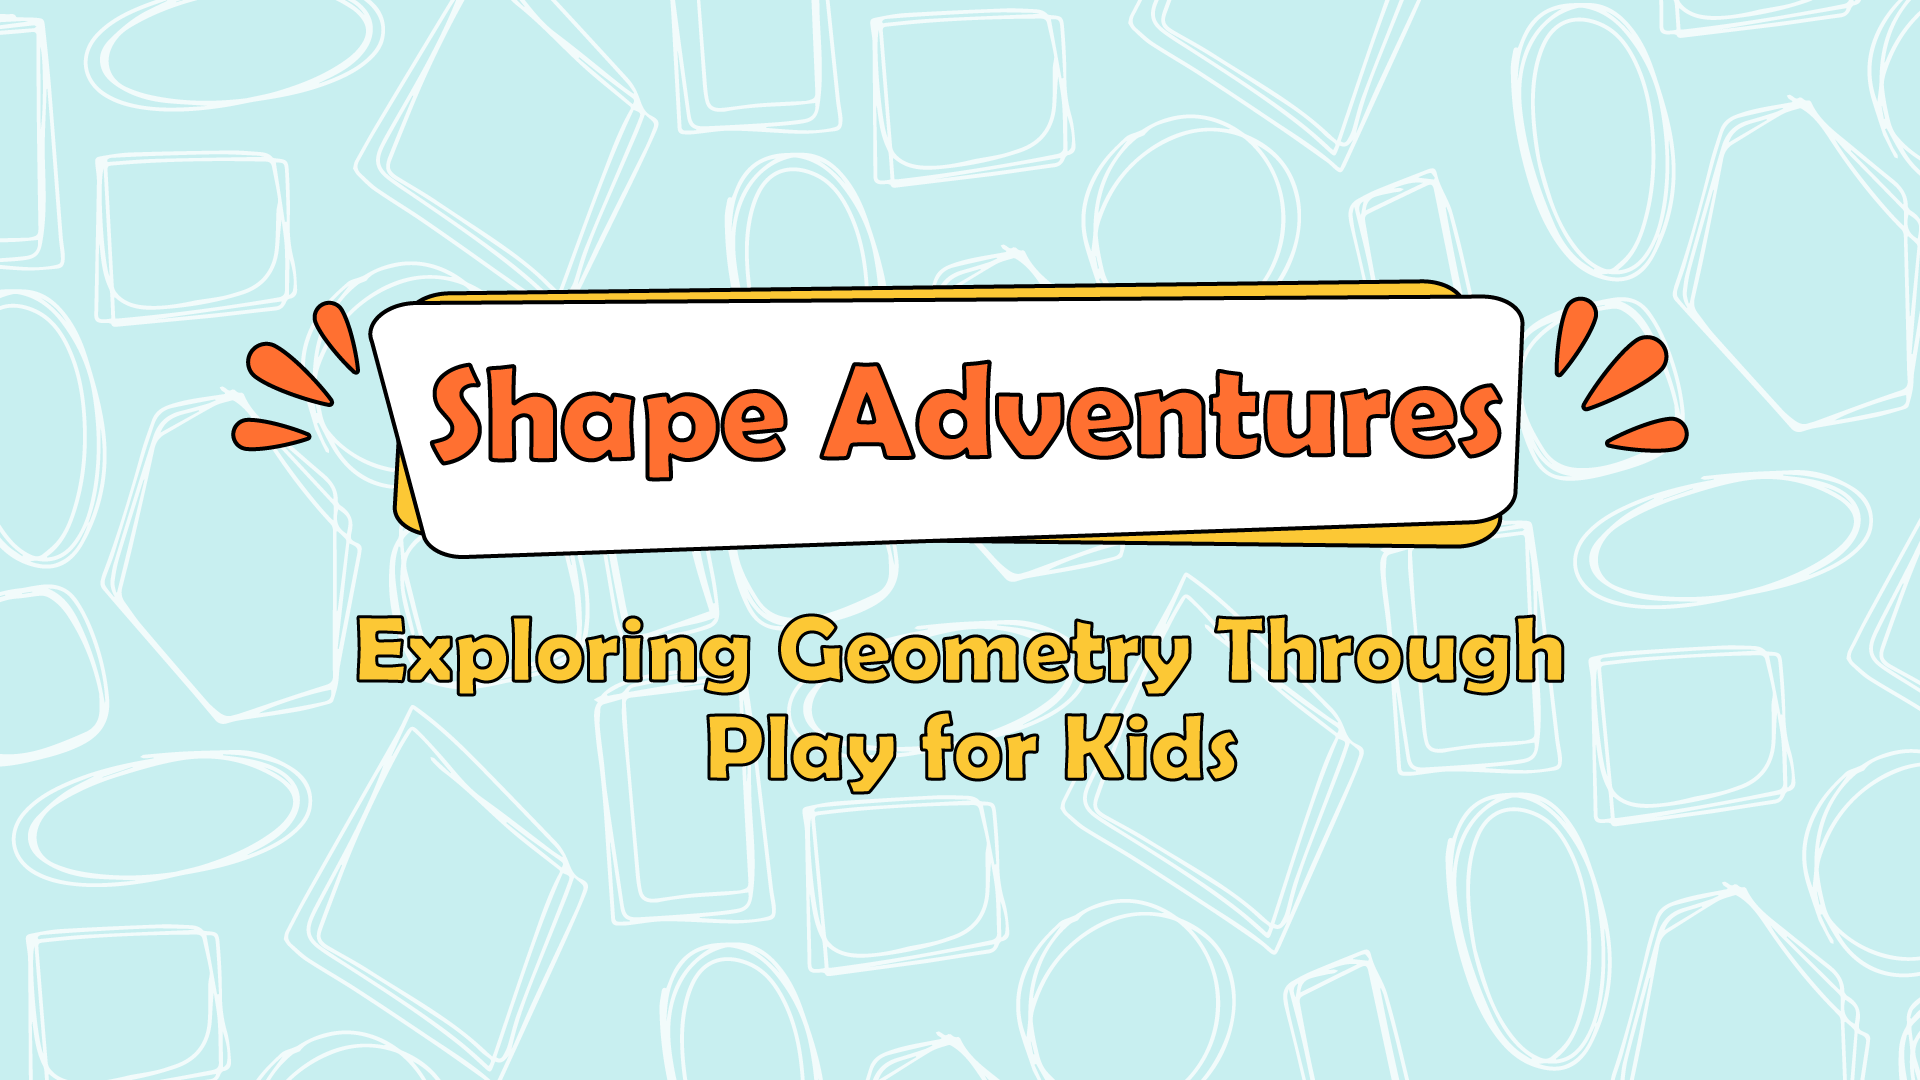 Shape Adventures: Exploring Geometry Through Play for Kids